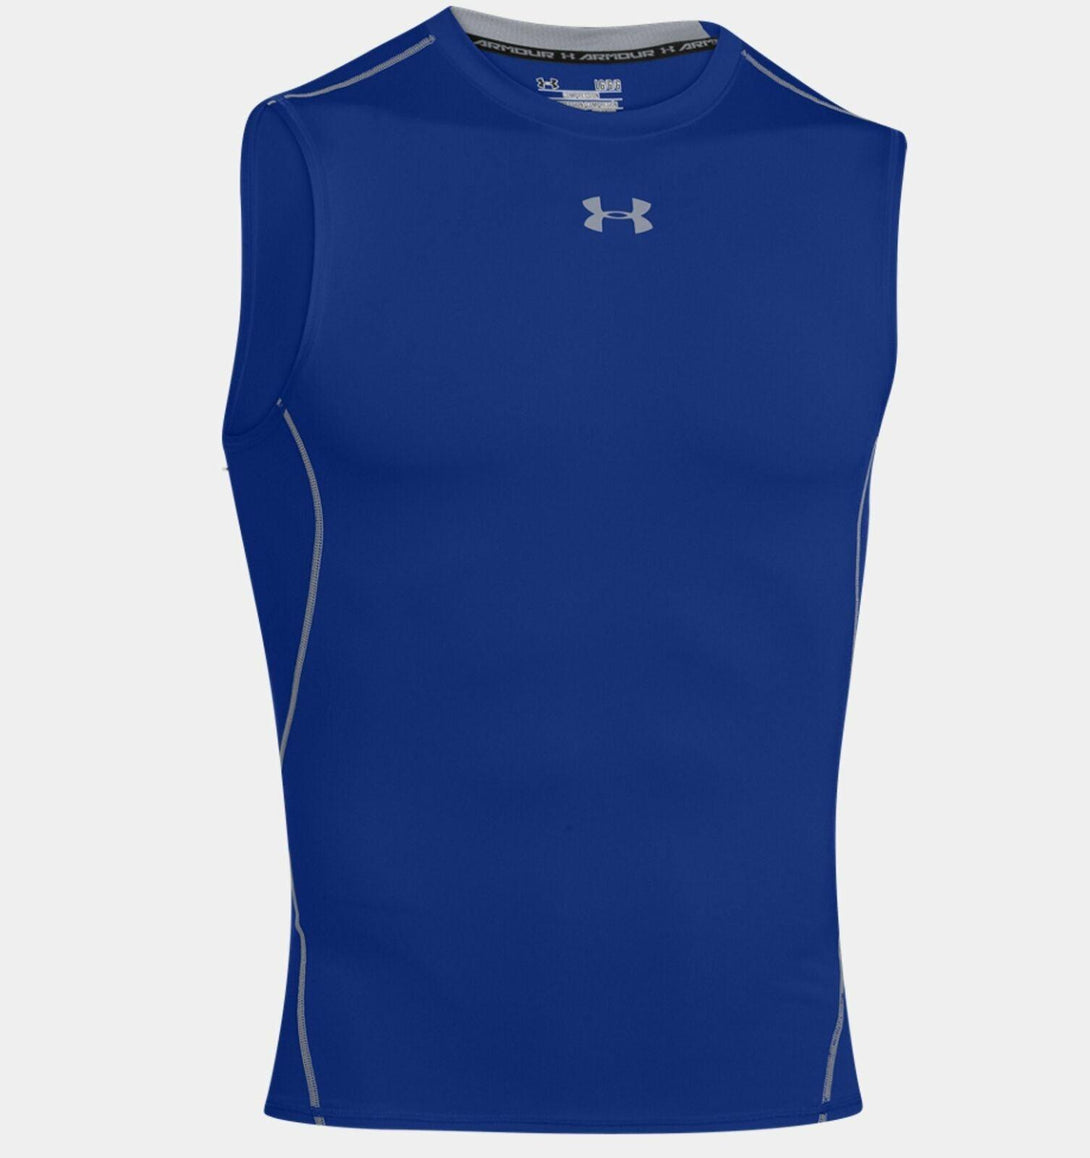 Rugby Heaven Under Armour HeatGear Compression Tank - www.rugby-heaven.co.uk